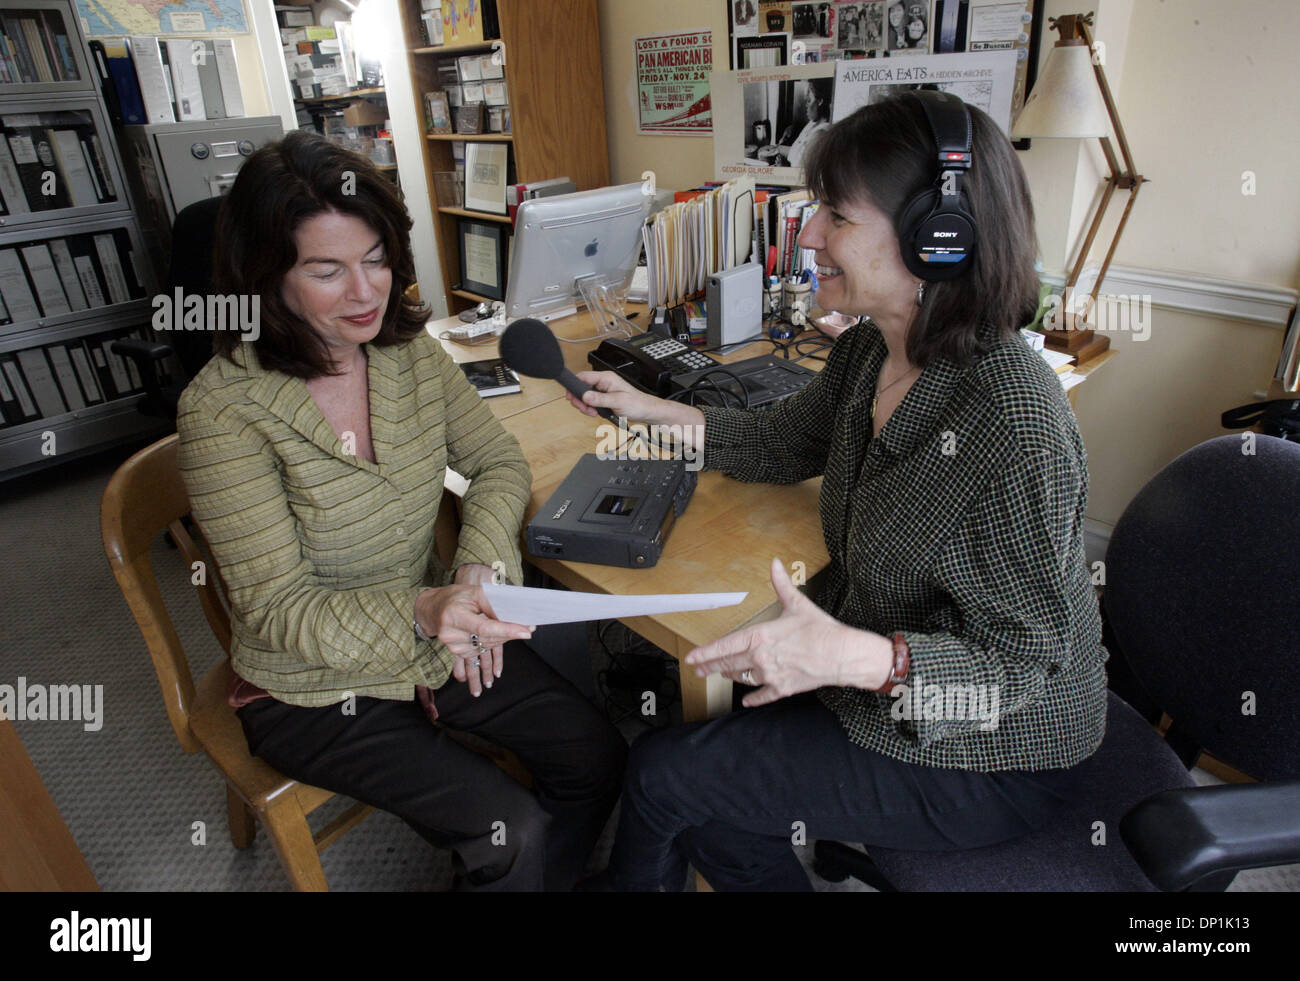 May 03, 2006; San Francisco, CA, USA; Davia Nelson and Nikki Silva, Nikki holds microphone as she records the voice of Davia for The Kitchen Sisters, a Bay Area duo who put together a fantastic radio show for NPR.  Mandatory Credit: Photo by Penni Gladstone/San Francisco Chronicle/ZUMA Press. (©) Copyright 2006 by San Francisco Chronicle Stock Photo